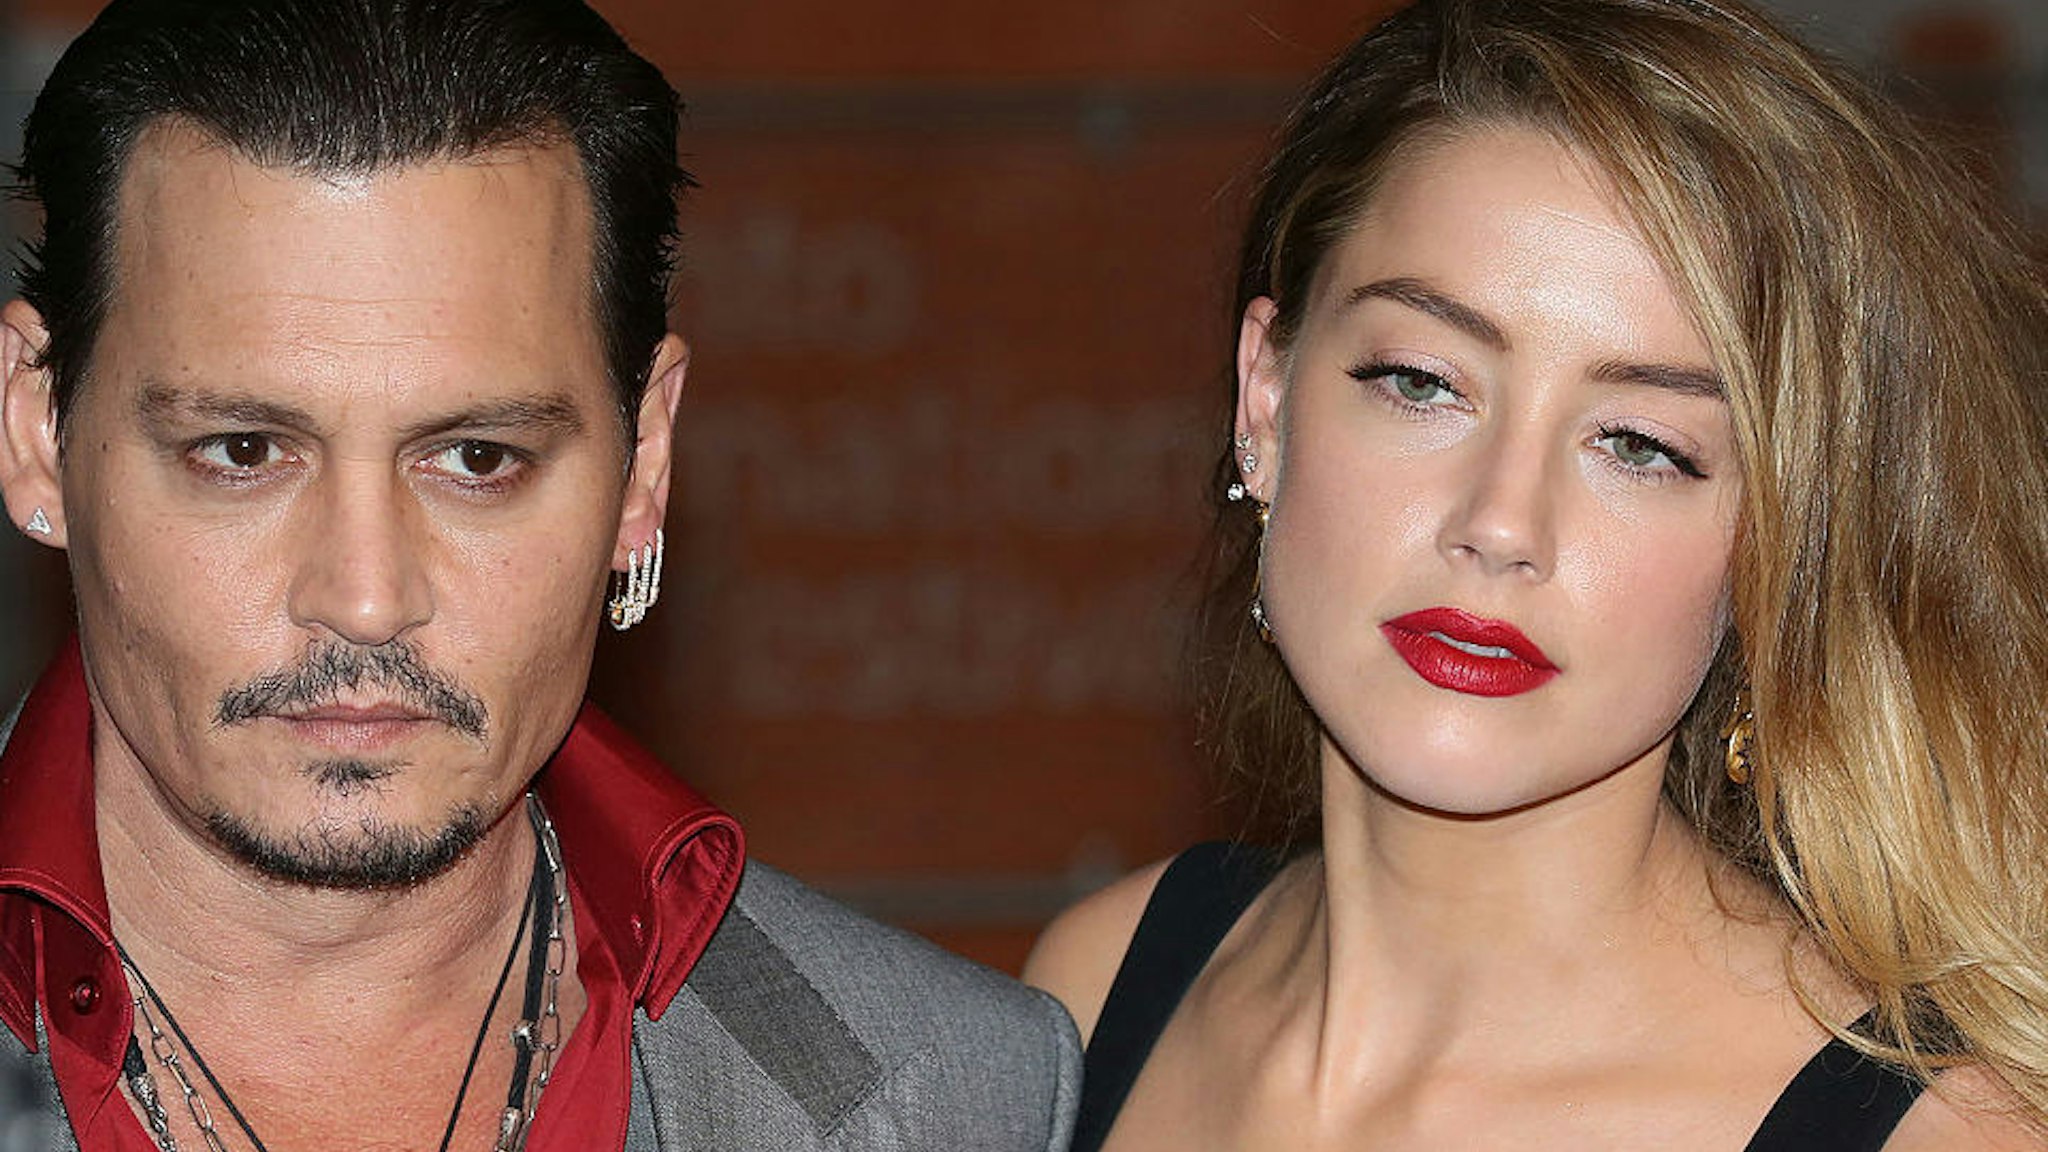 Johnny Depp and Amber Heard attend the 'Black Mass' premiere during the 2015 Toronto International Film Festival at The Elgin on September 14, 2015 in Toronto, Canada.